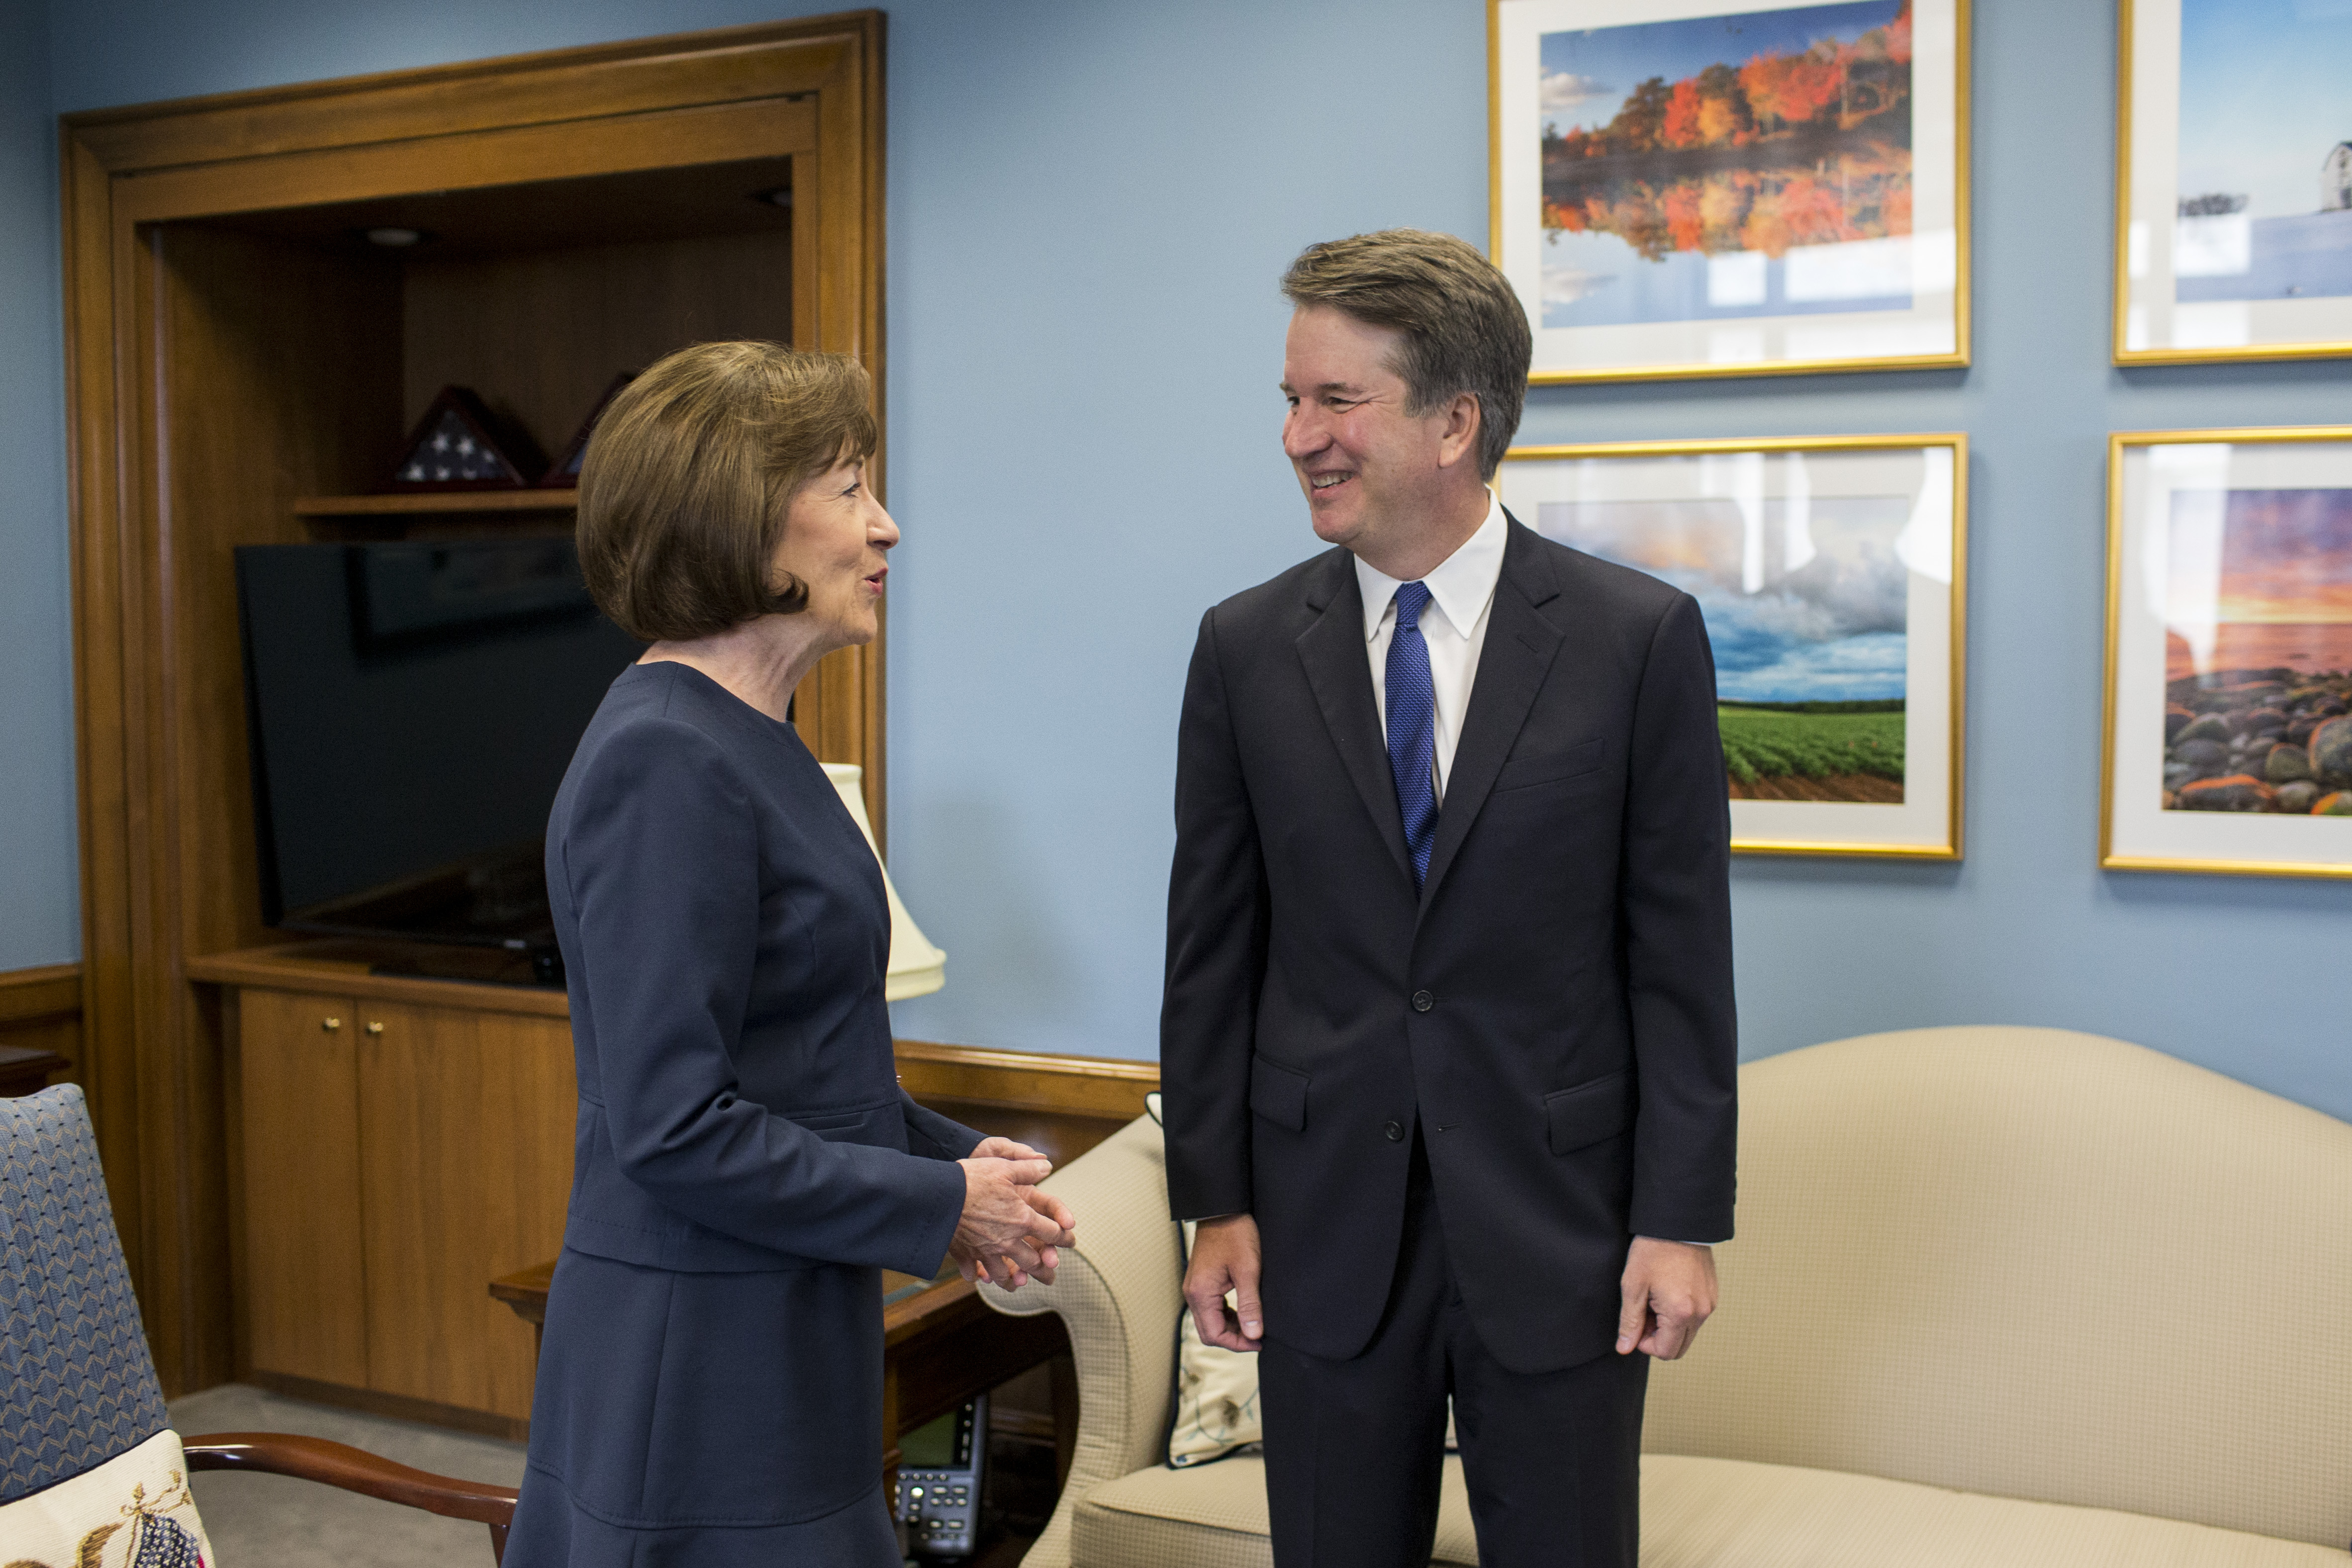 Supreme Court Nominee Brett Kavanaugh meets with Sen. Susan Collins (R-ME) in her office on Capitol Hill on August 21, 2018 in Washington, DC. (Zach Gibson—Getty Images)